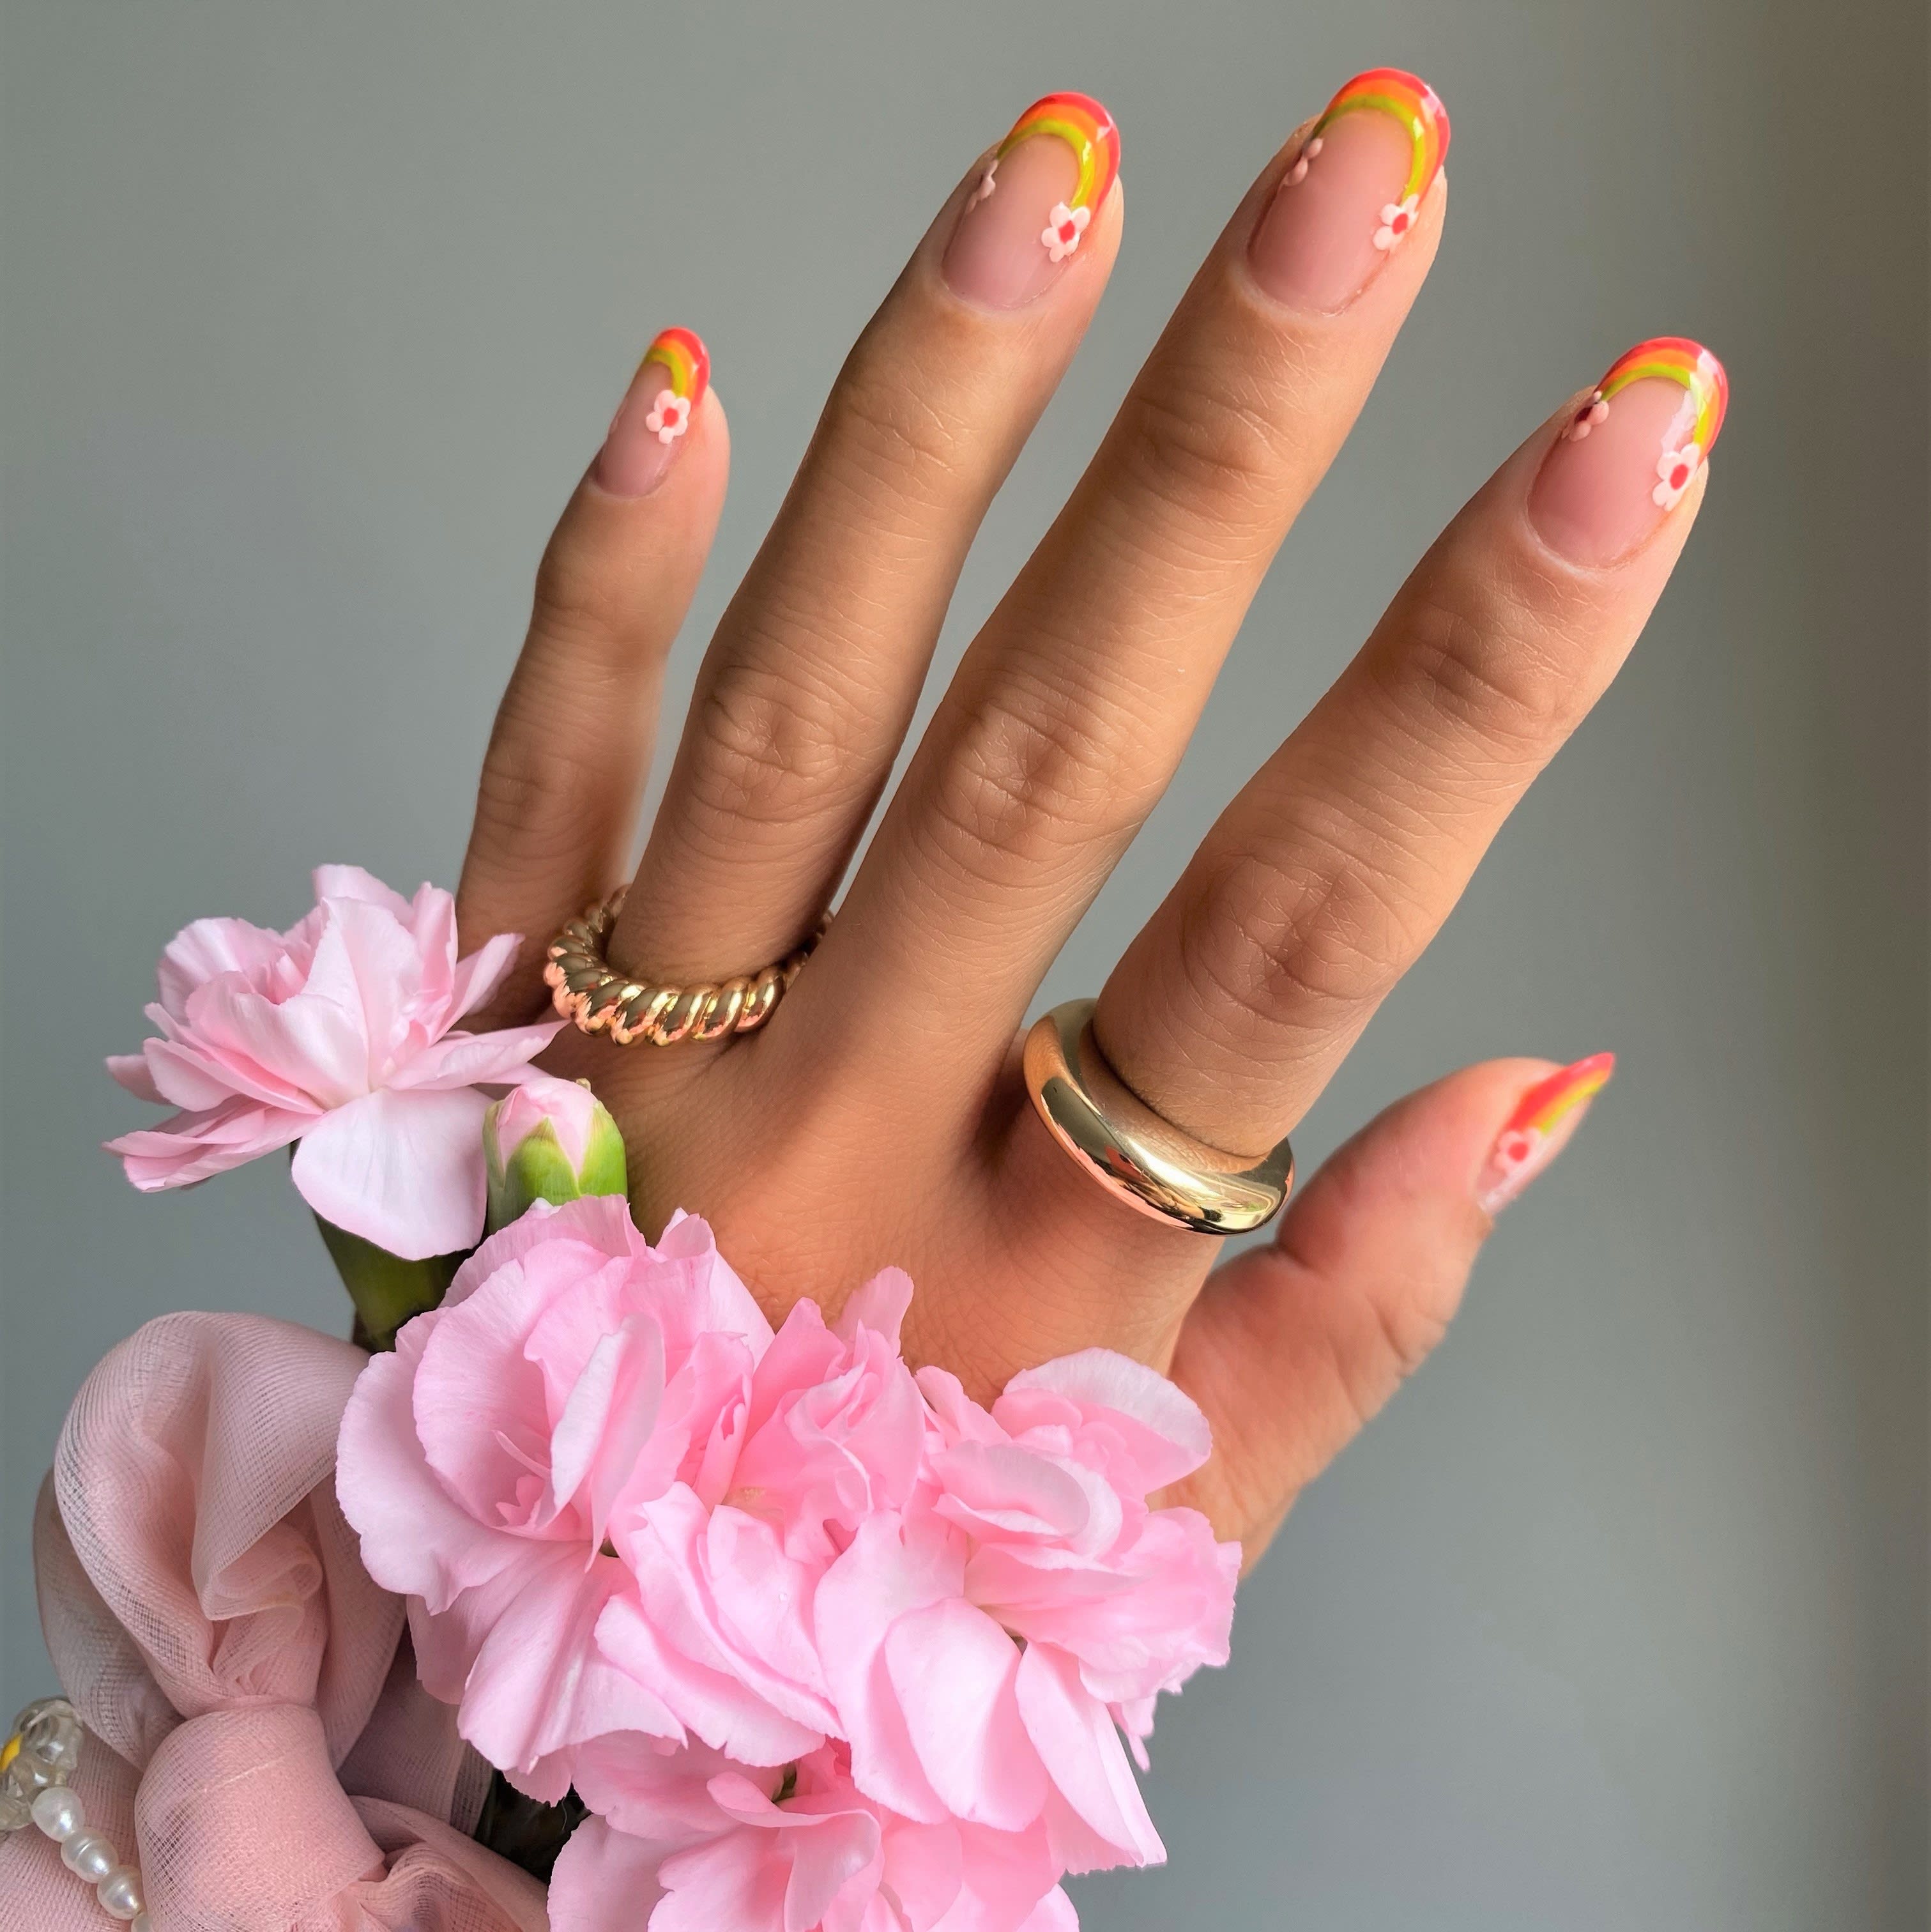 Sweeten Up Your Mani With Juicy Pink And Green Nails - Lulus.com Fashion  Blog